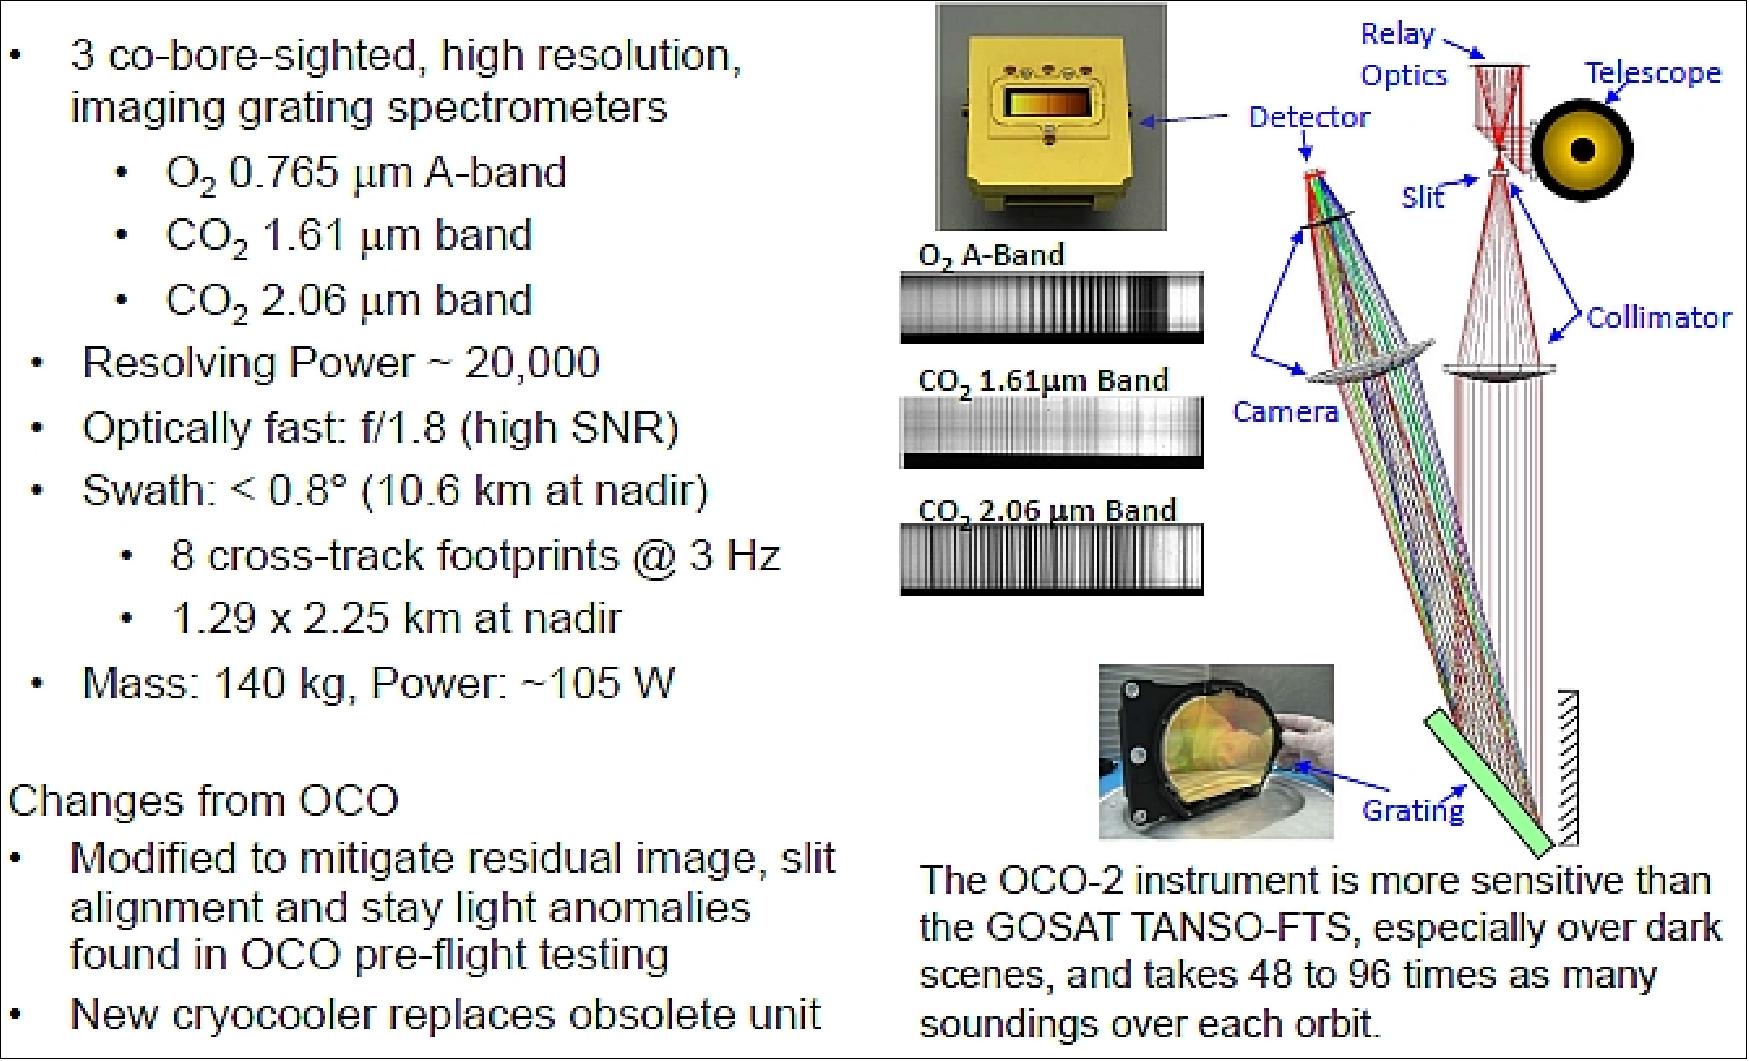 Figure 31: The OCO-2 instrument showing the major optical components and optical path (image credit: NASA/JPL) 63)